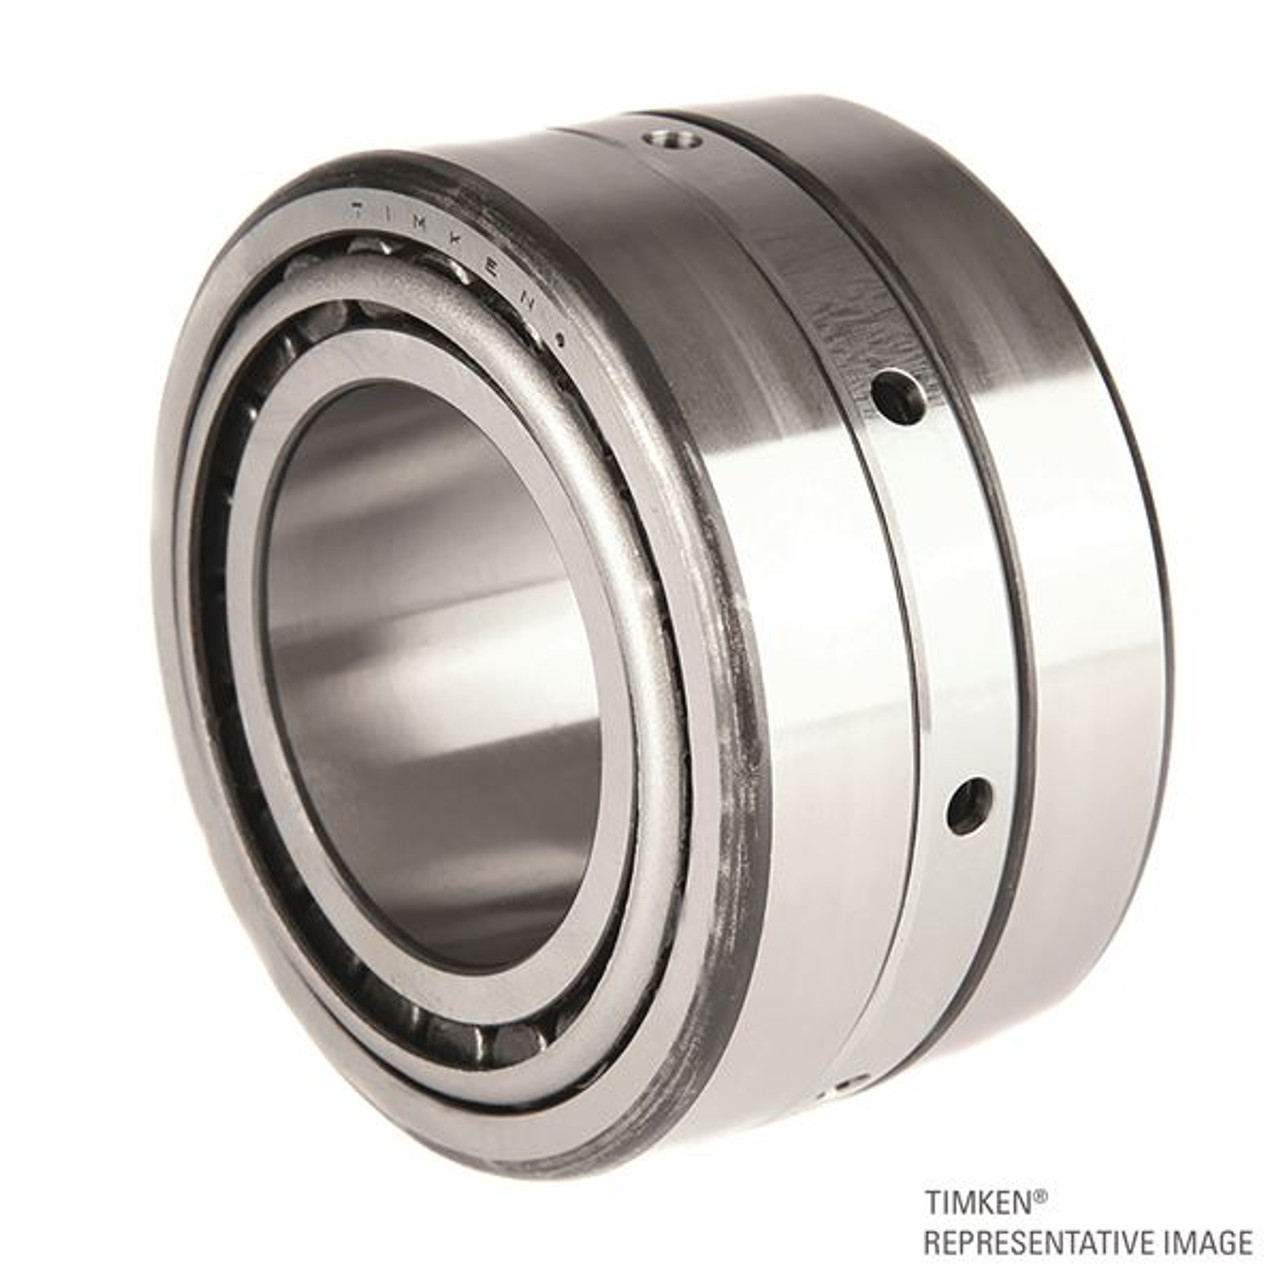 Timken® TDI Single Double Cone Assembly  M231649-902A6